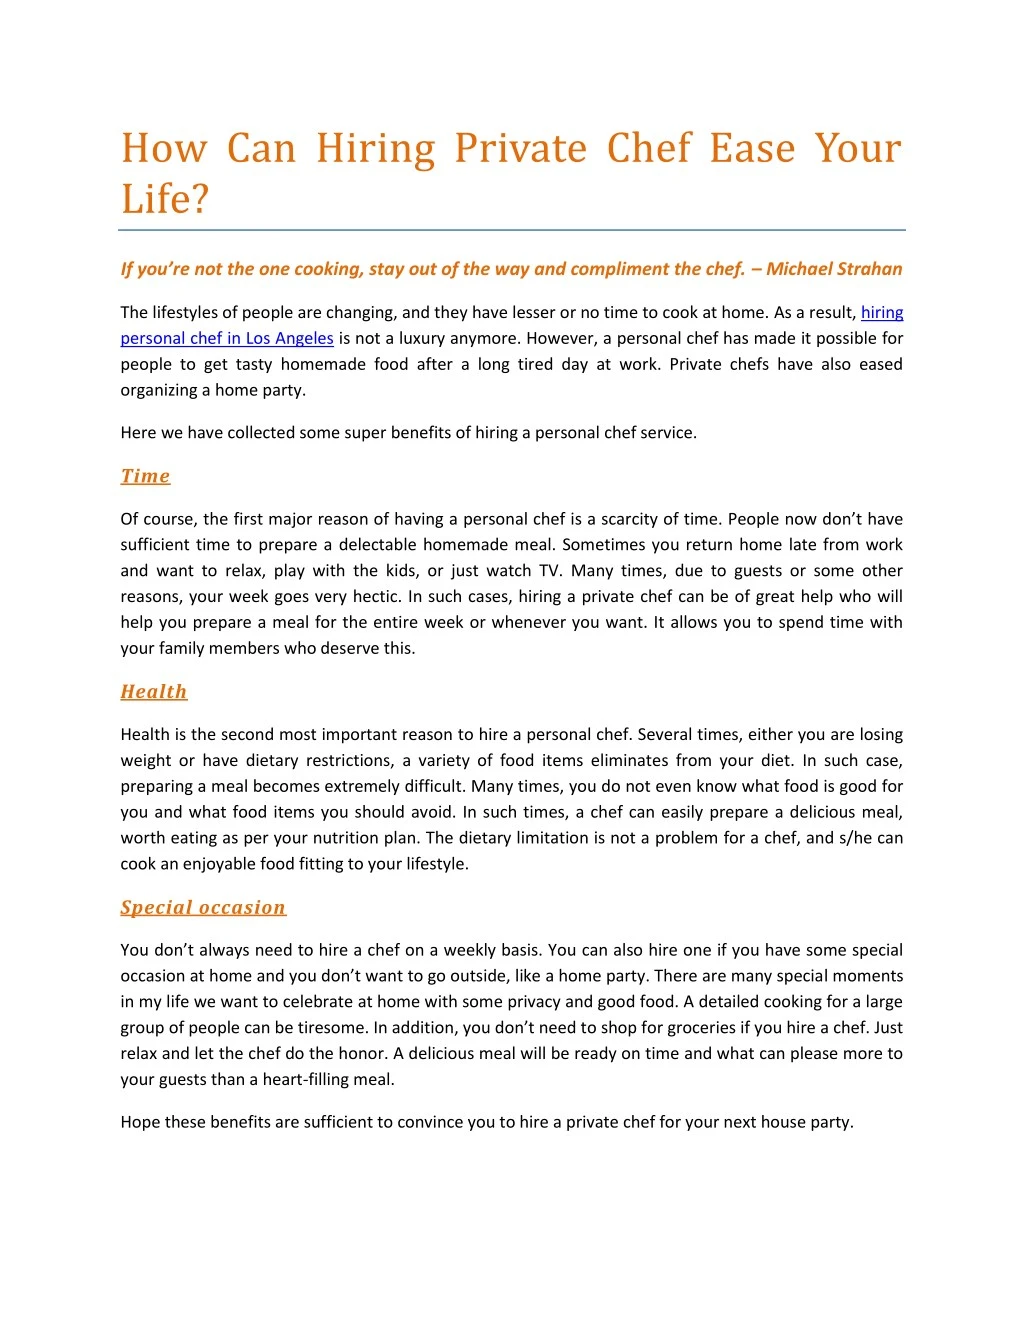 how can hiring private chef ease your life